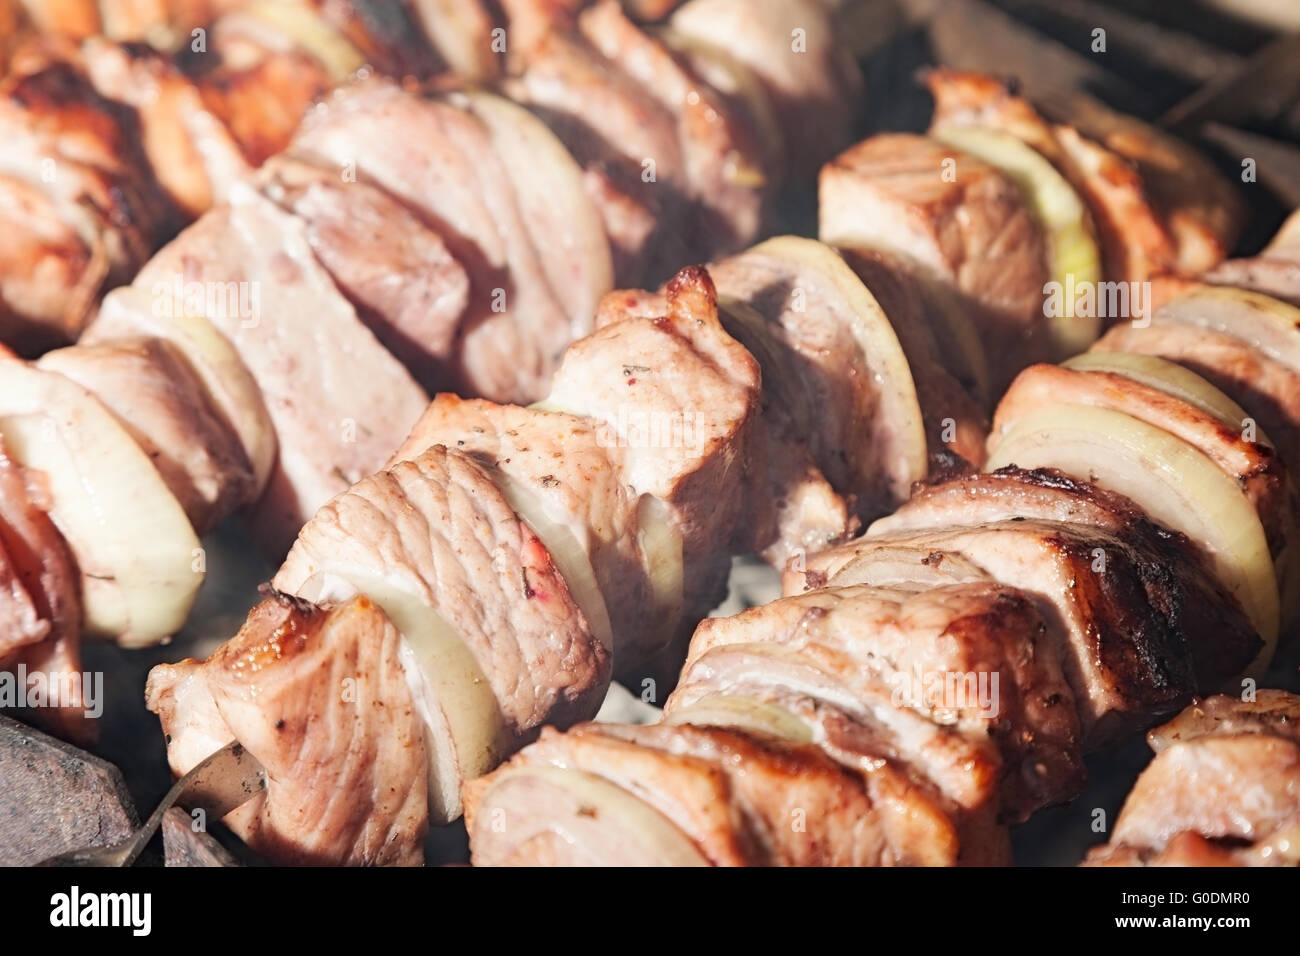 shashlik with onions. Juicy slices of meat being prepared in the heat. Delicious juicy meal Stock Photo